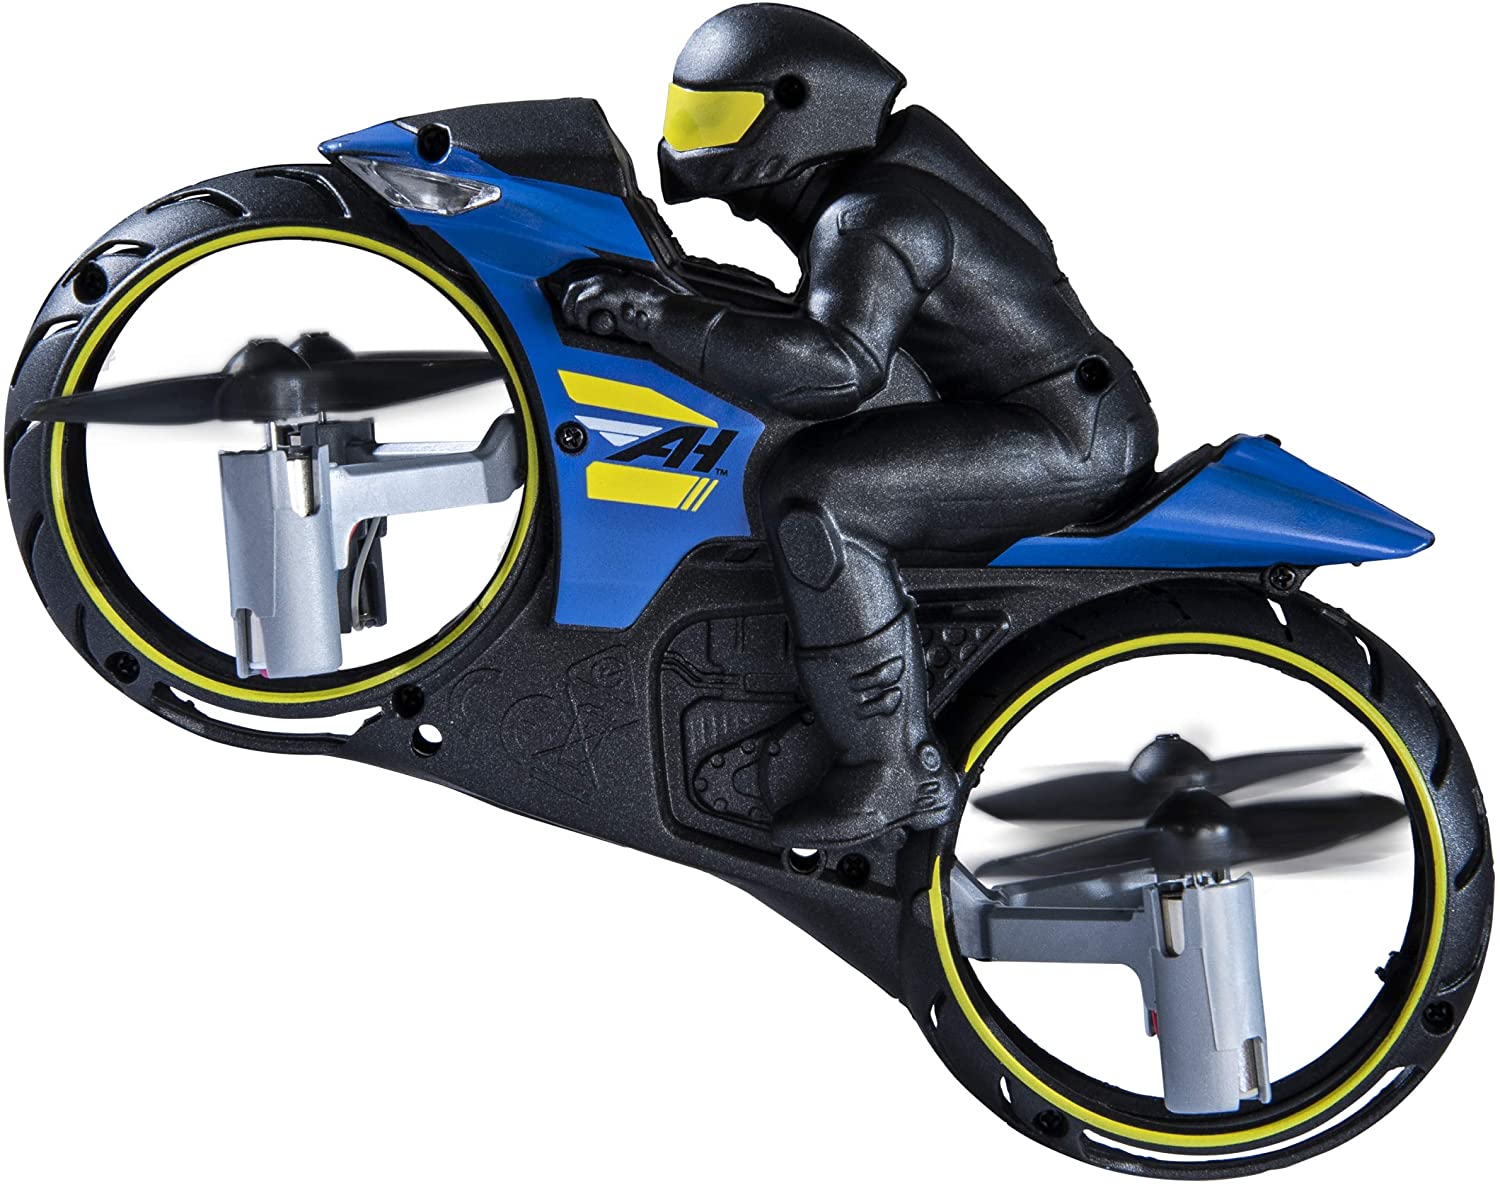 Air Hogs Flight Rider 2-in-1 Remote Control Stunt Motorcycle for Ground and Air, for Kids Ages 8+ - image 2 of 6